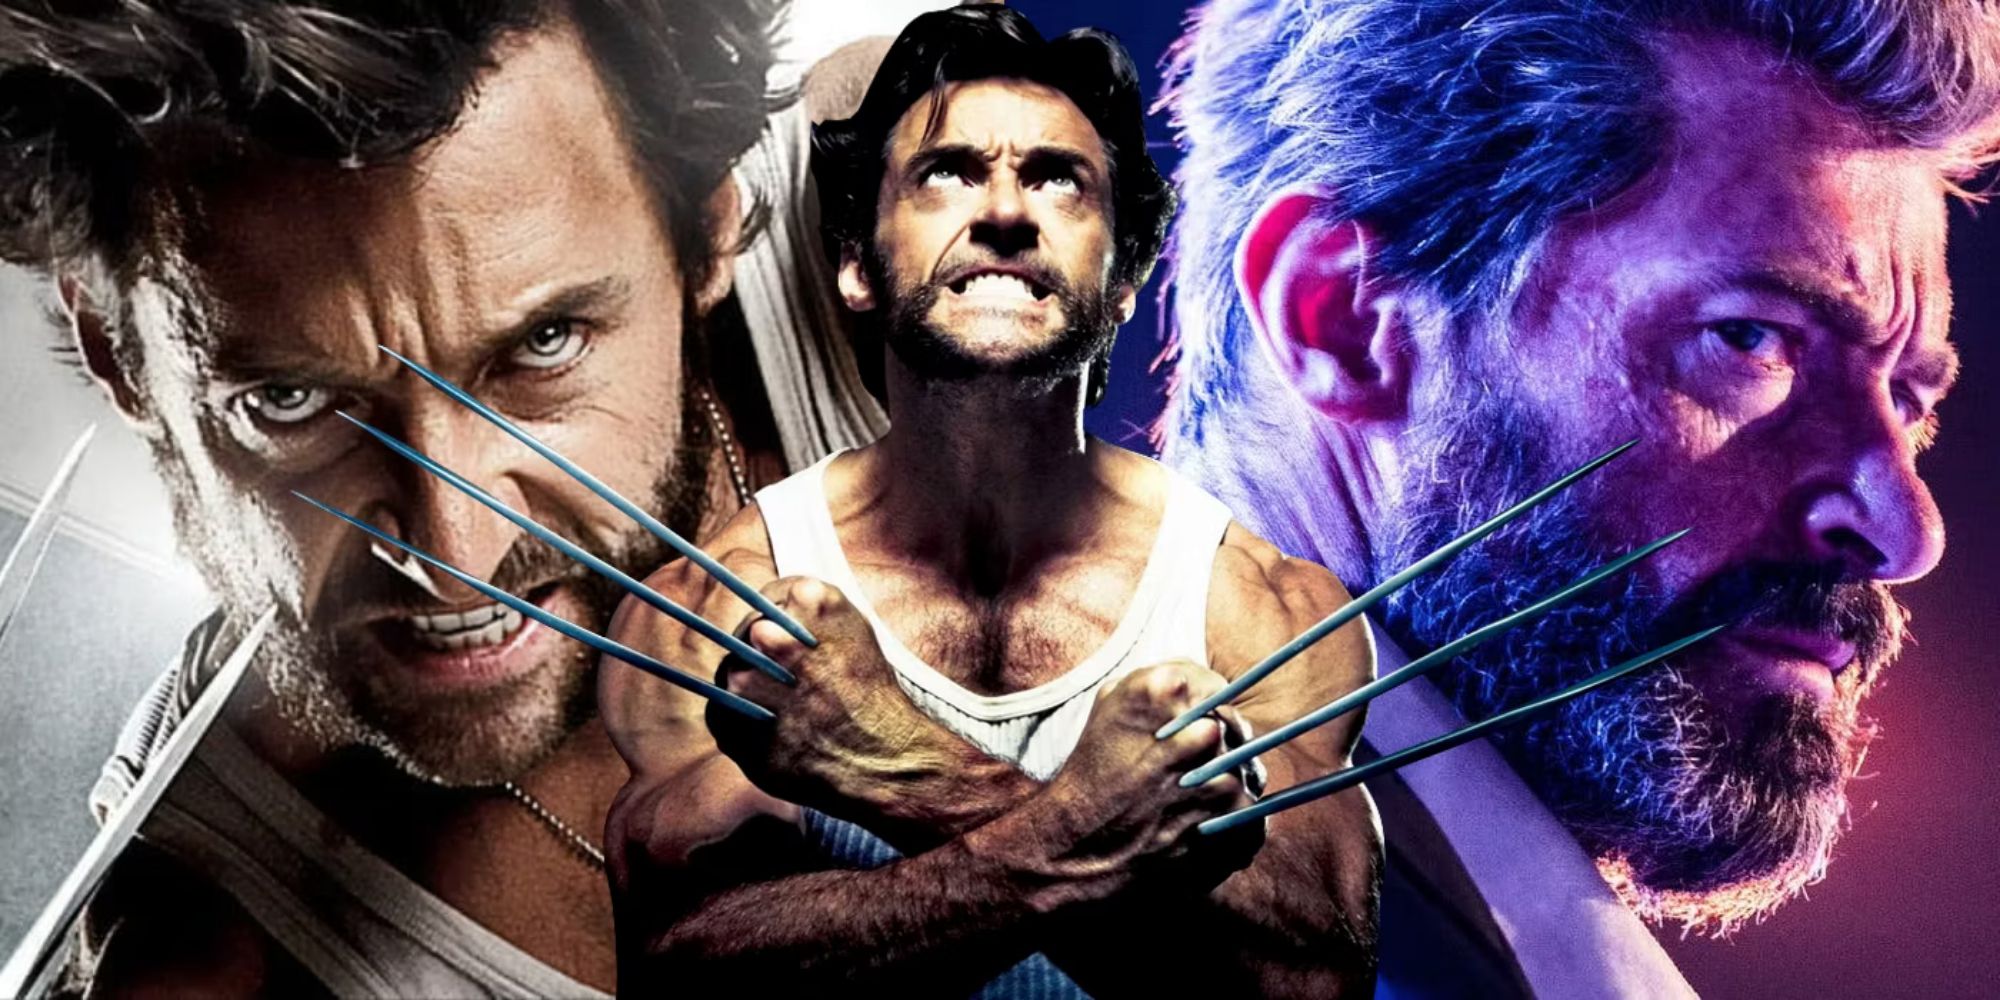 Hugh Jackman's Wolverine in Fox's X-Men franchise over the years